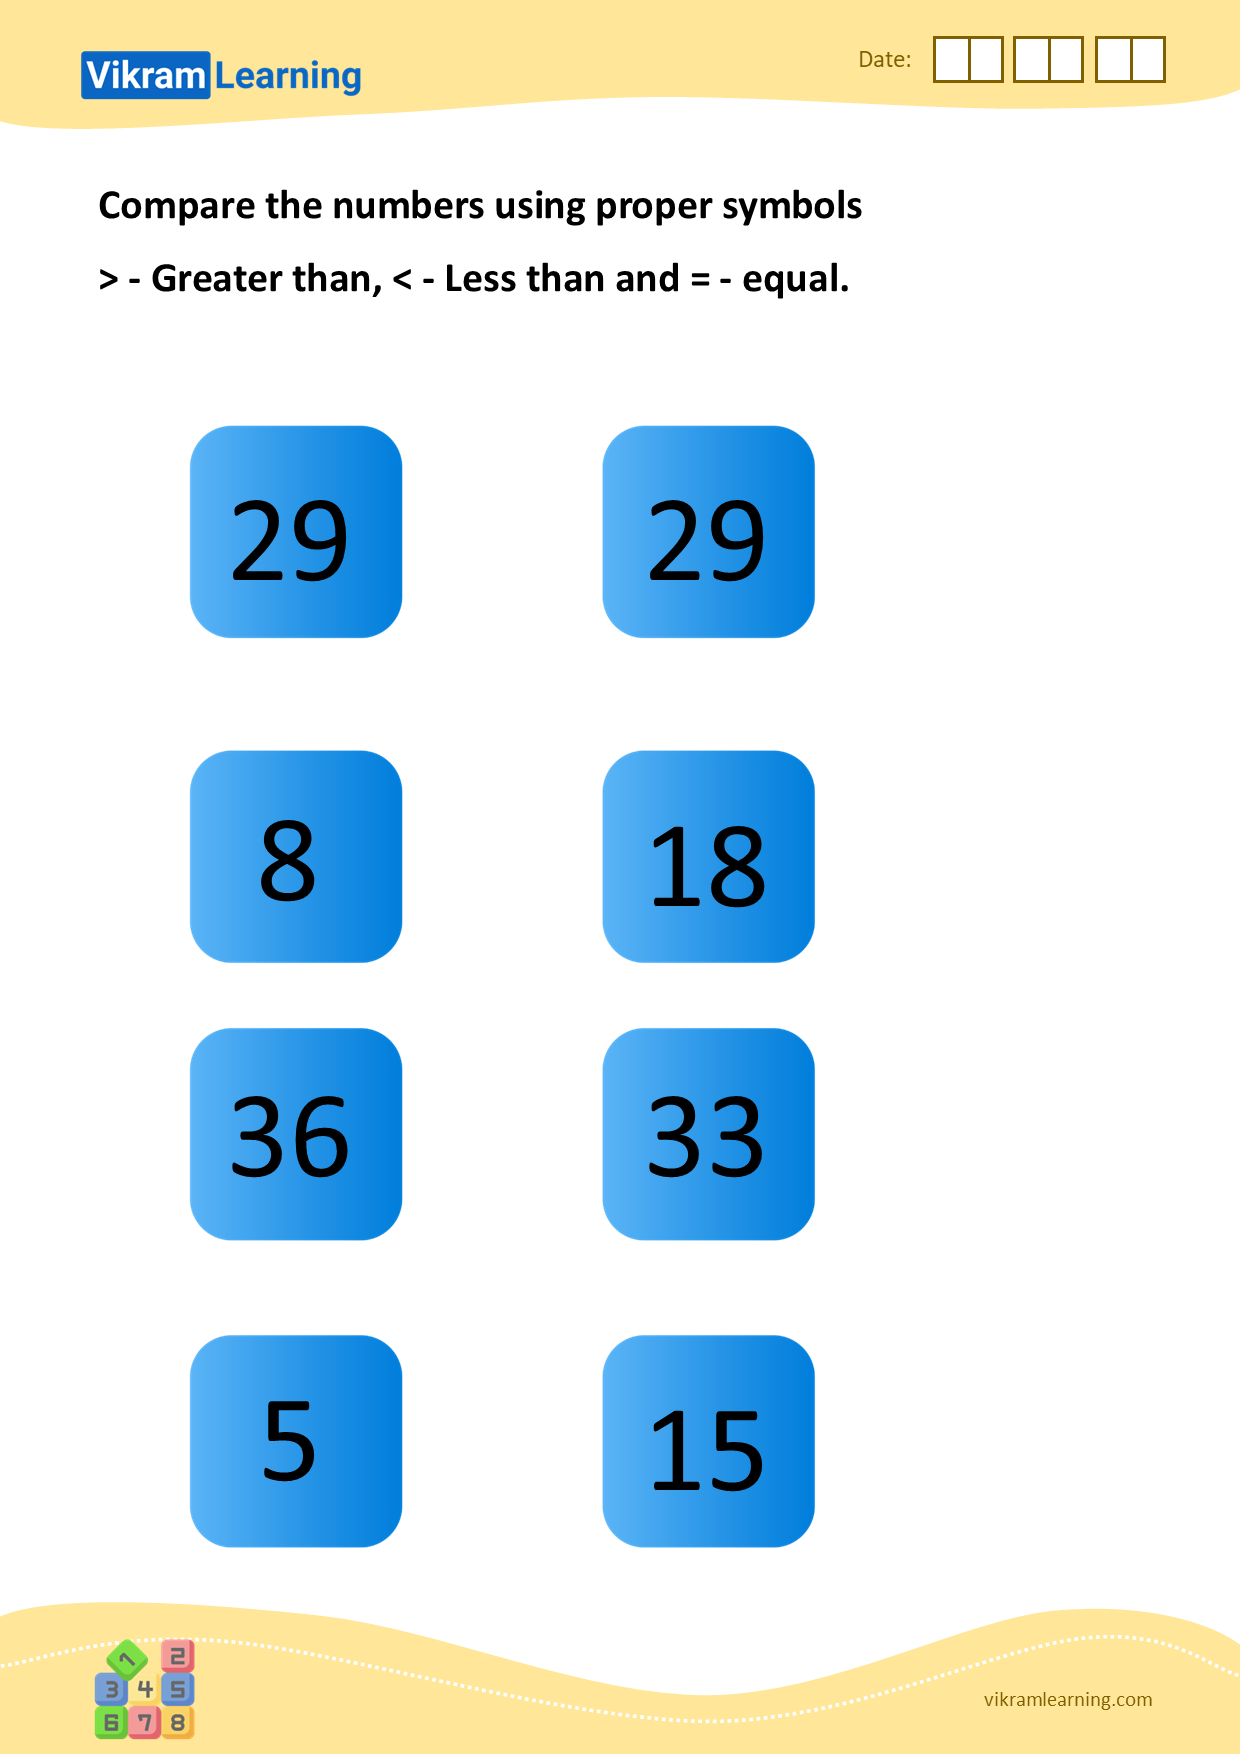 download-compare-the-numbers-using-proper-symbols-n-greater-than